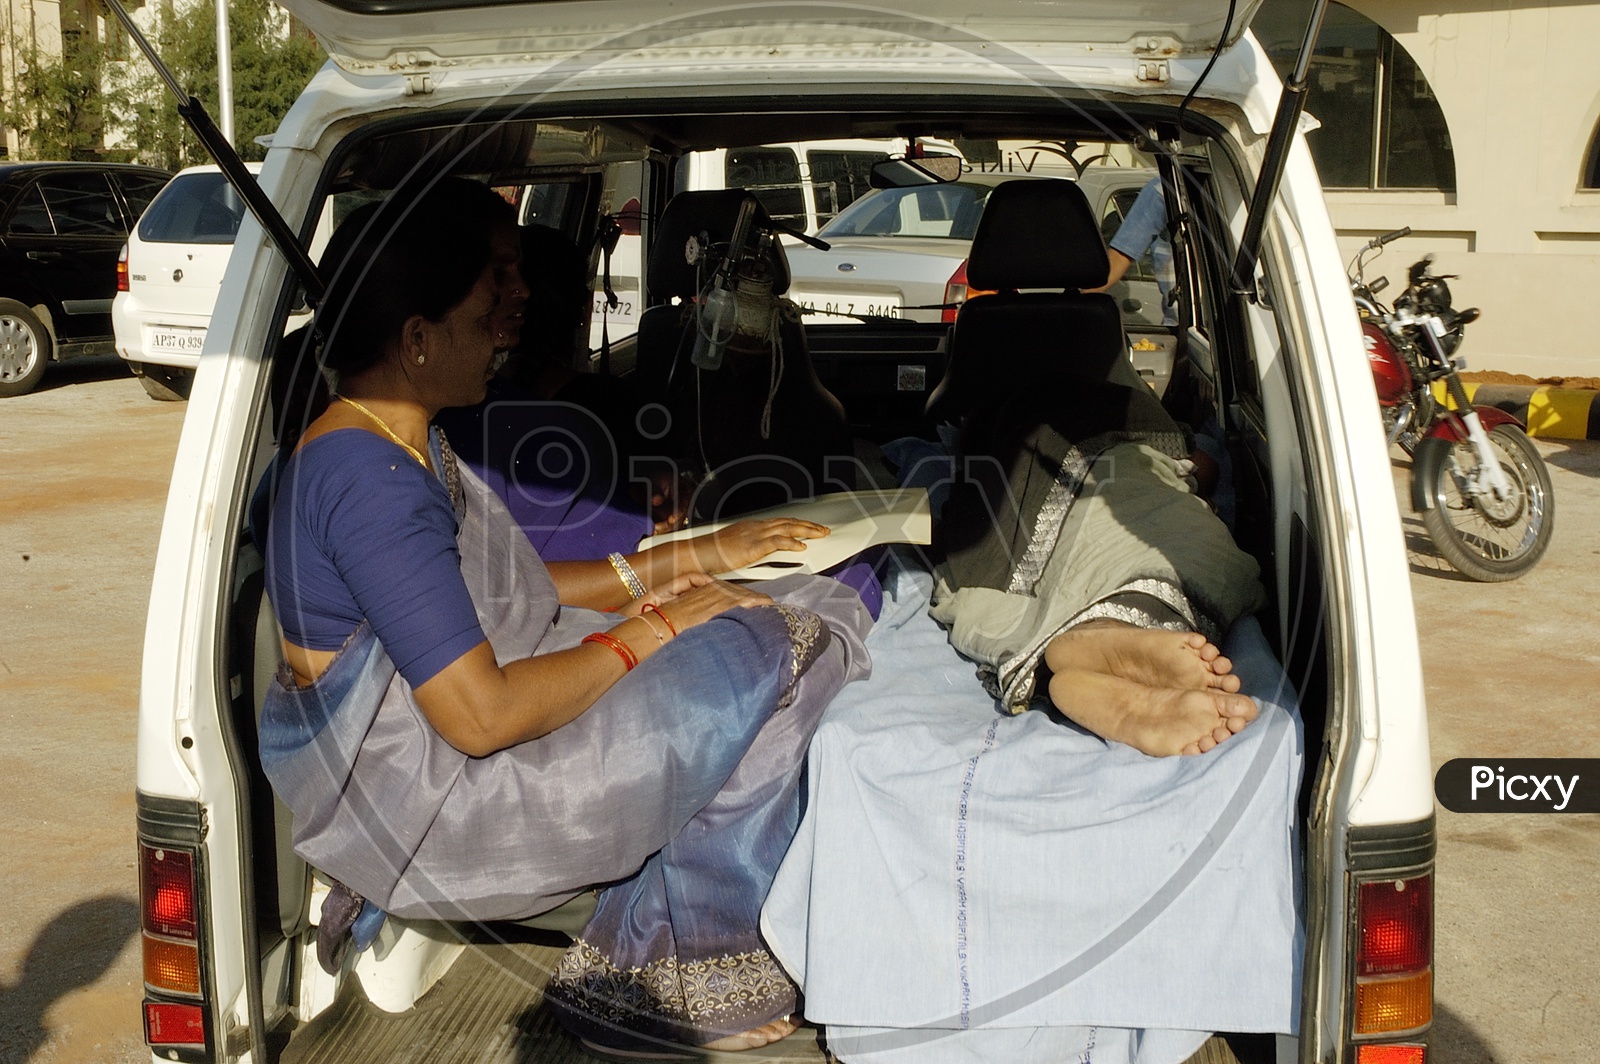 Women taking the patient to hospital in an ambulance